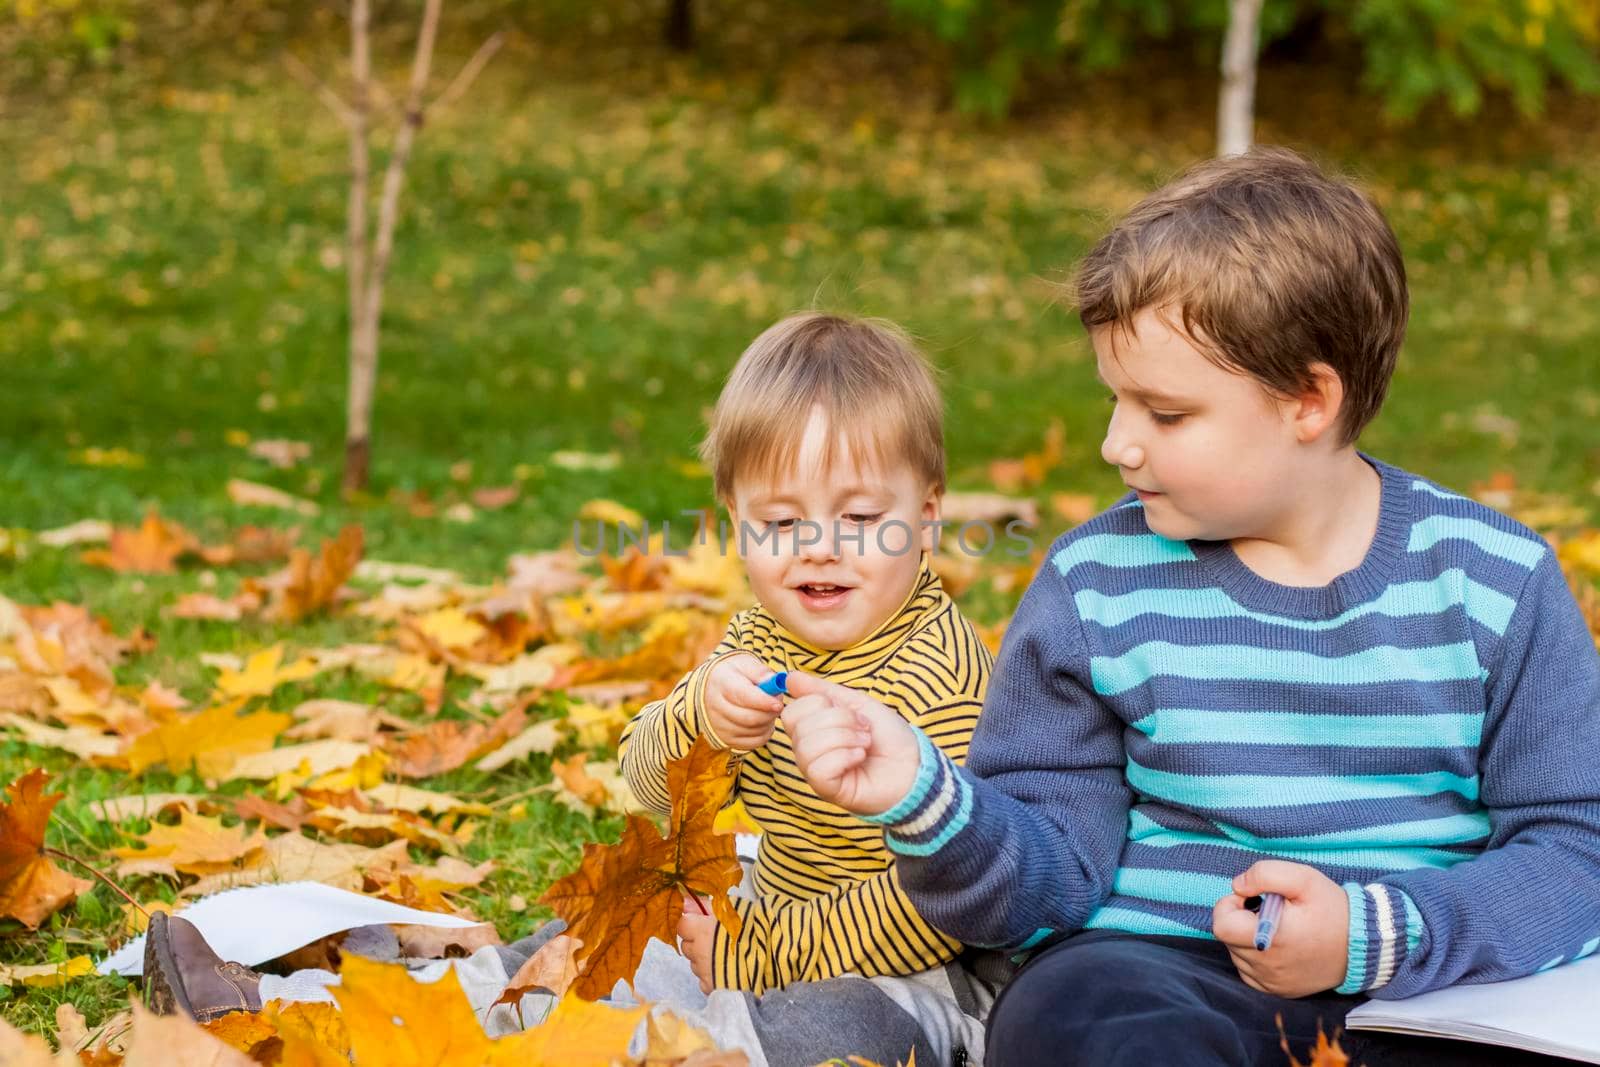 Autumn mood. The boys are sitting on a blanket in the park. Autumn portrait of a child in yellow foliage. Sight. A sweet, caring boy.  by Alina_Lebed